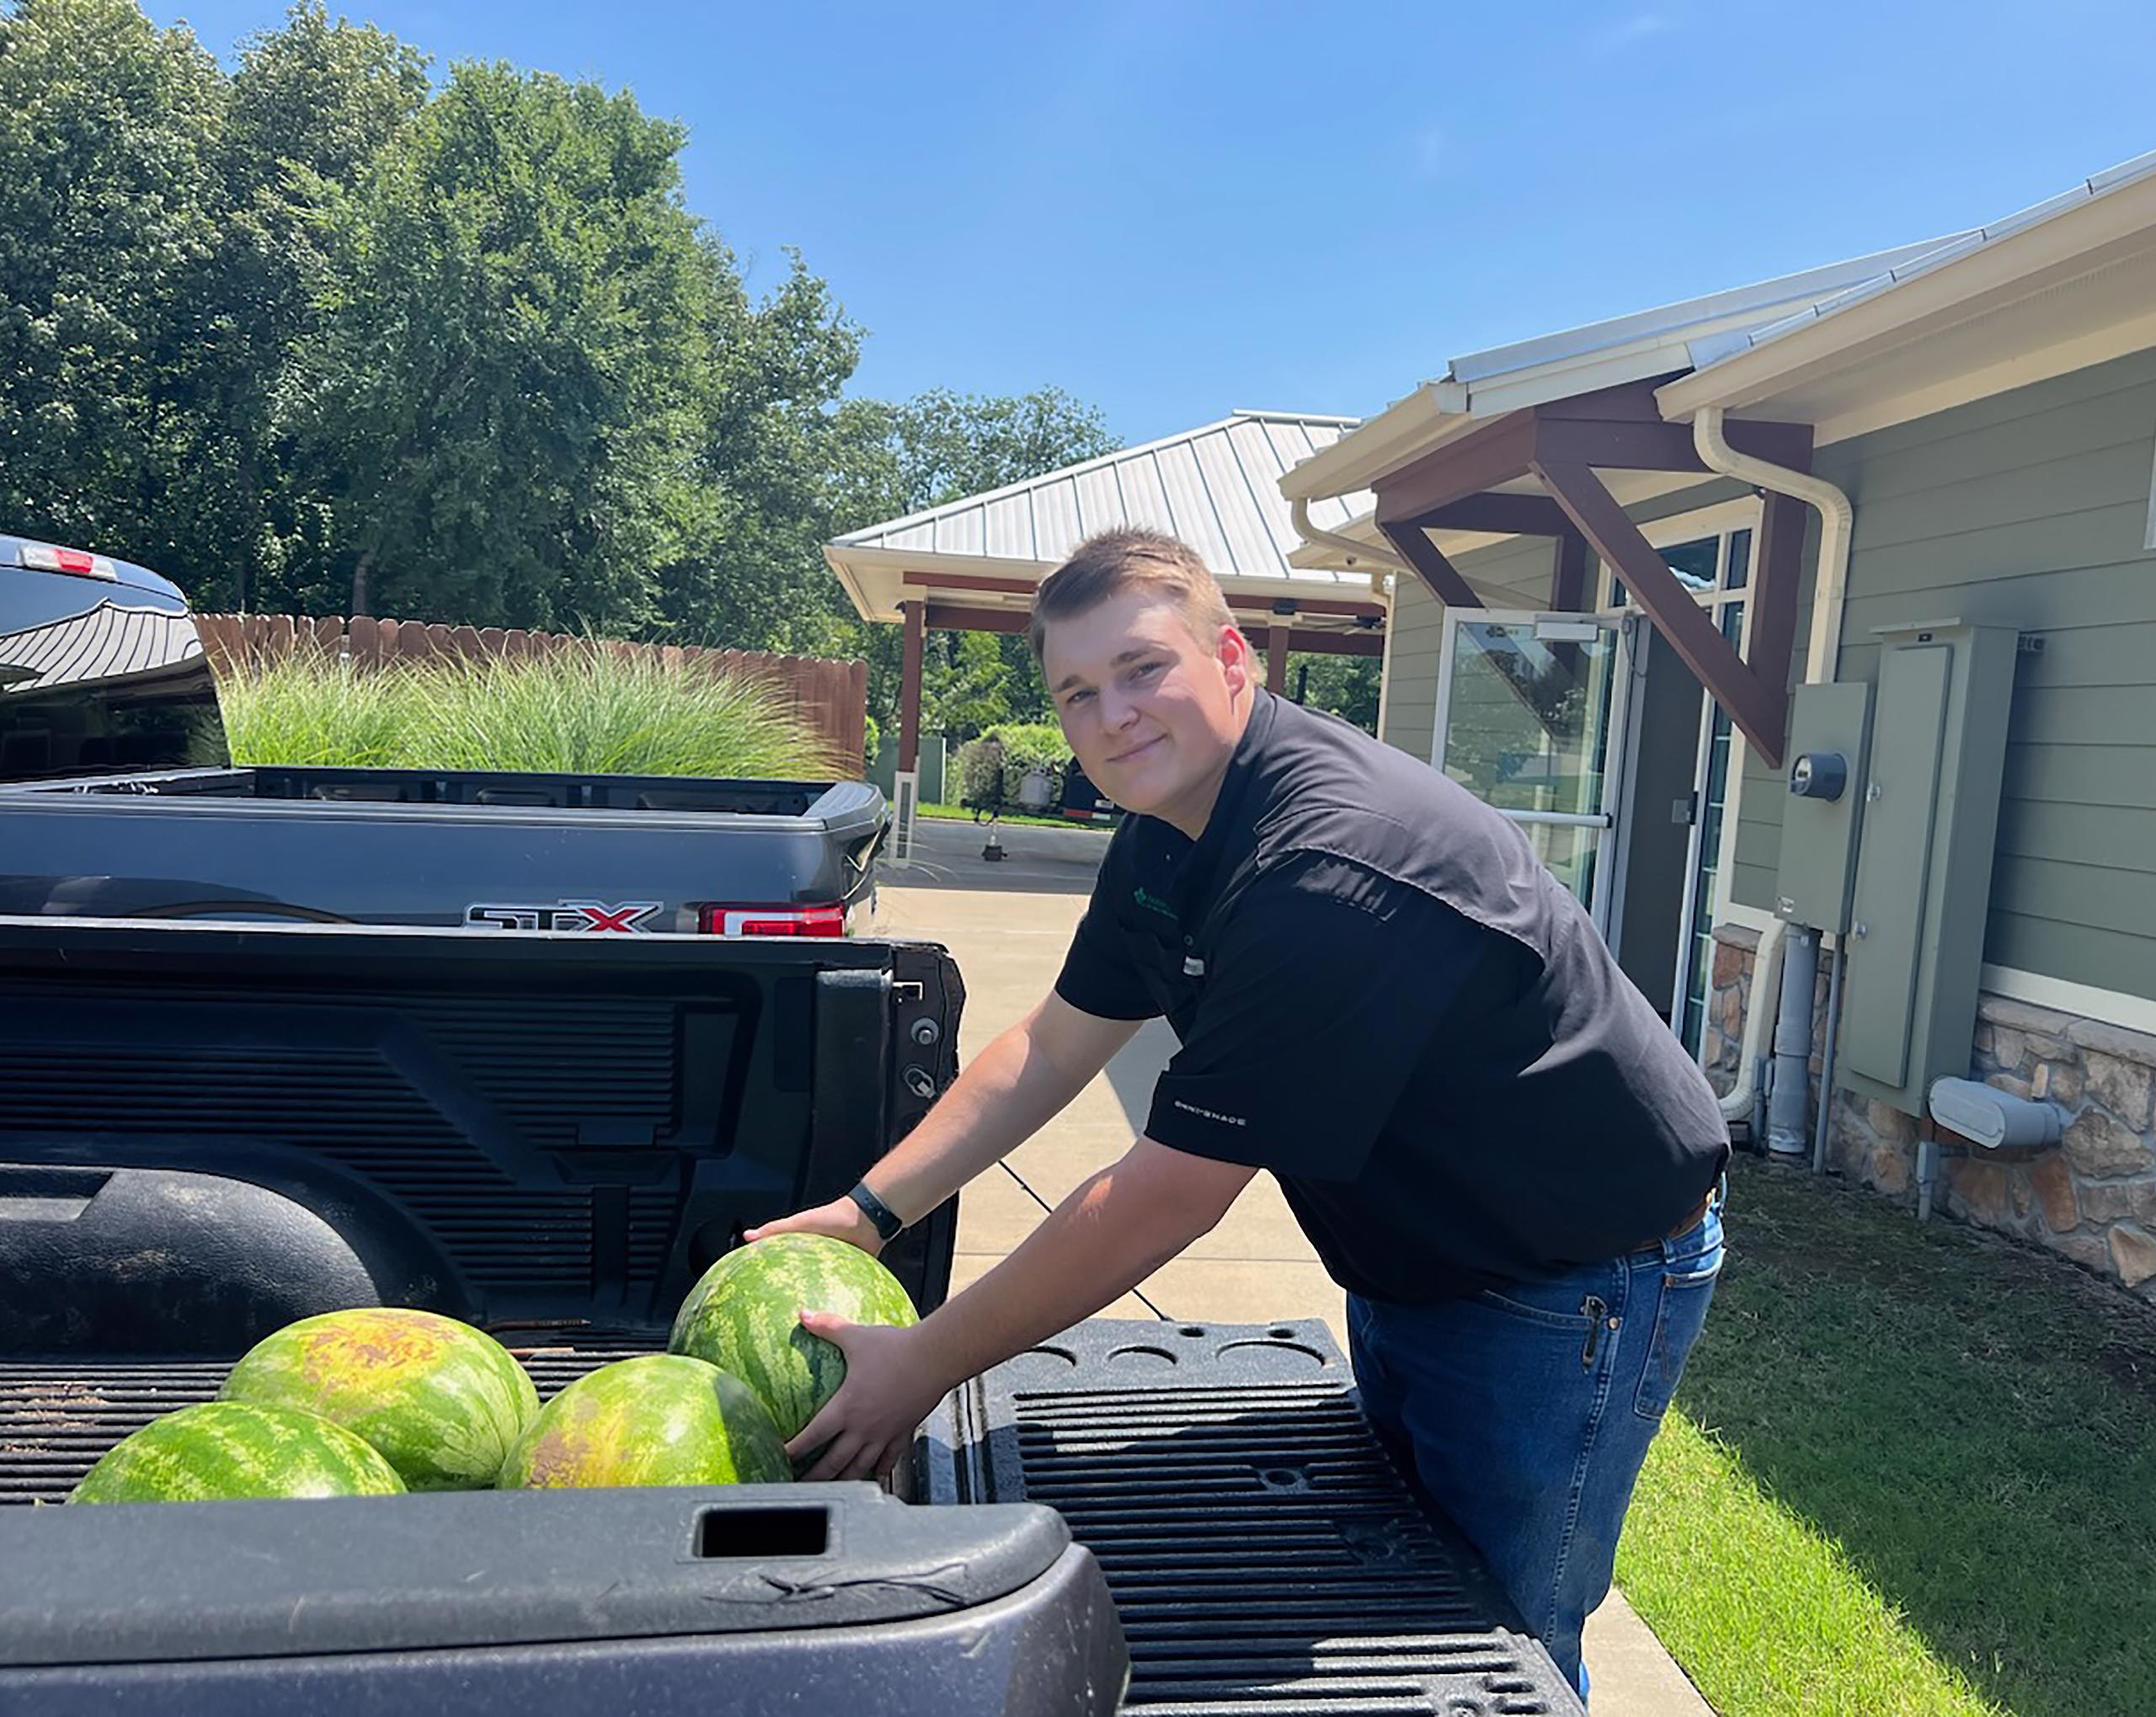 Austin Bell, Field Services Intern, loads watermelons into back of truck while smiling at camera